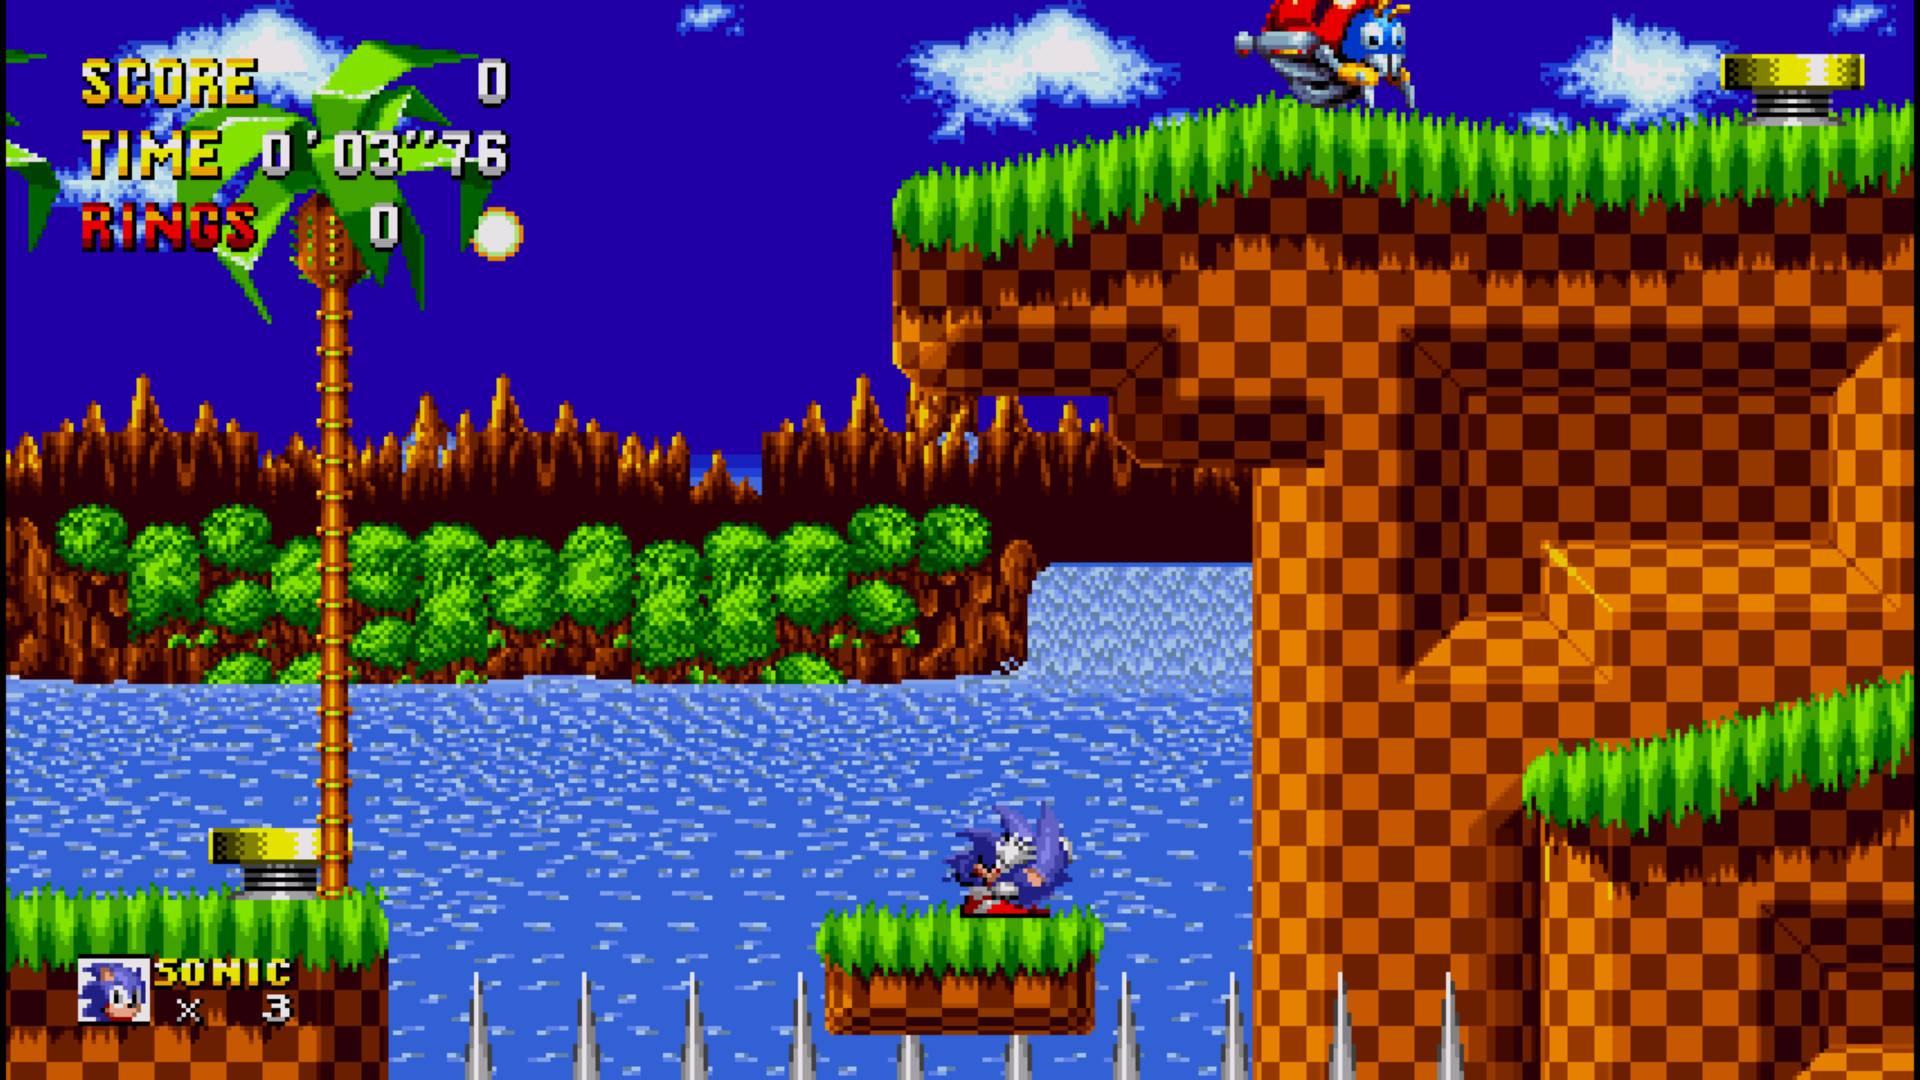 Mania Sonic in Sonic Forever [Sonic the Hedgehog Forever] [Mods]